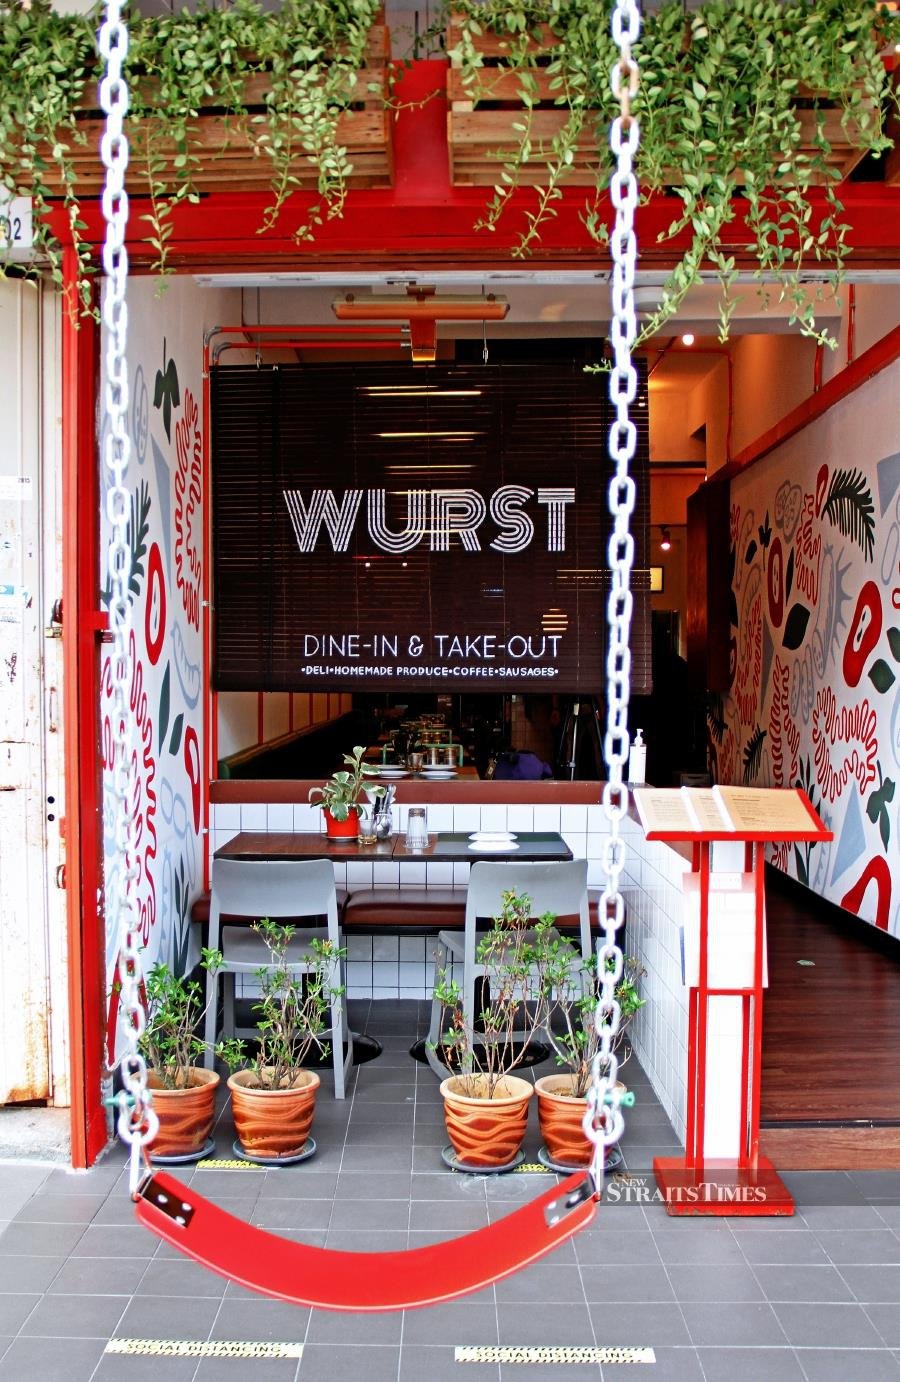  Wurst's inviting entrance welcomes diners to its Bangsar location. Pictures by David Bowden.